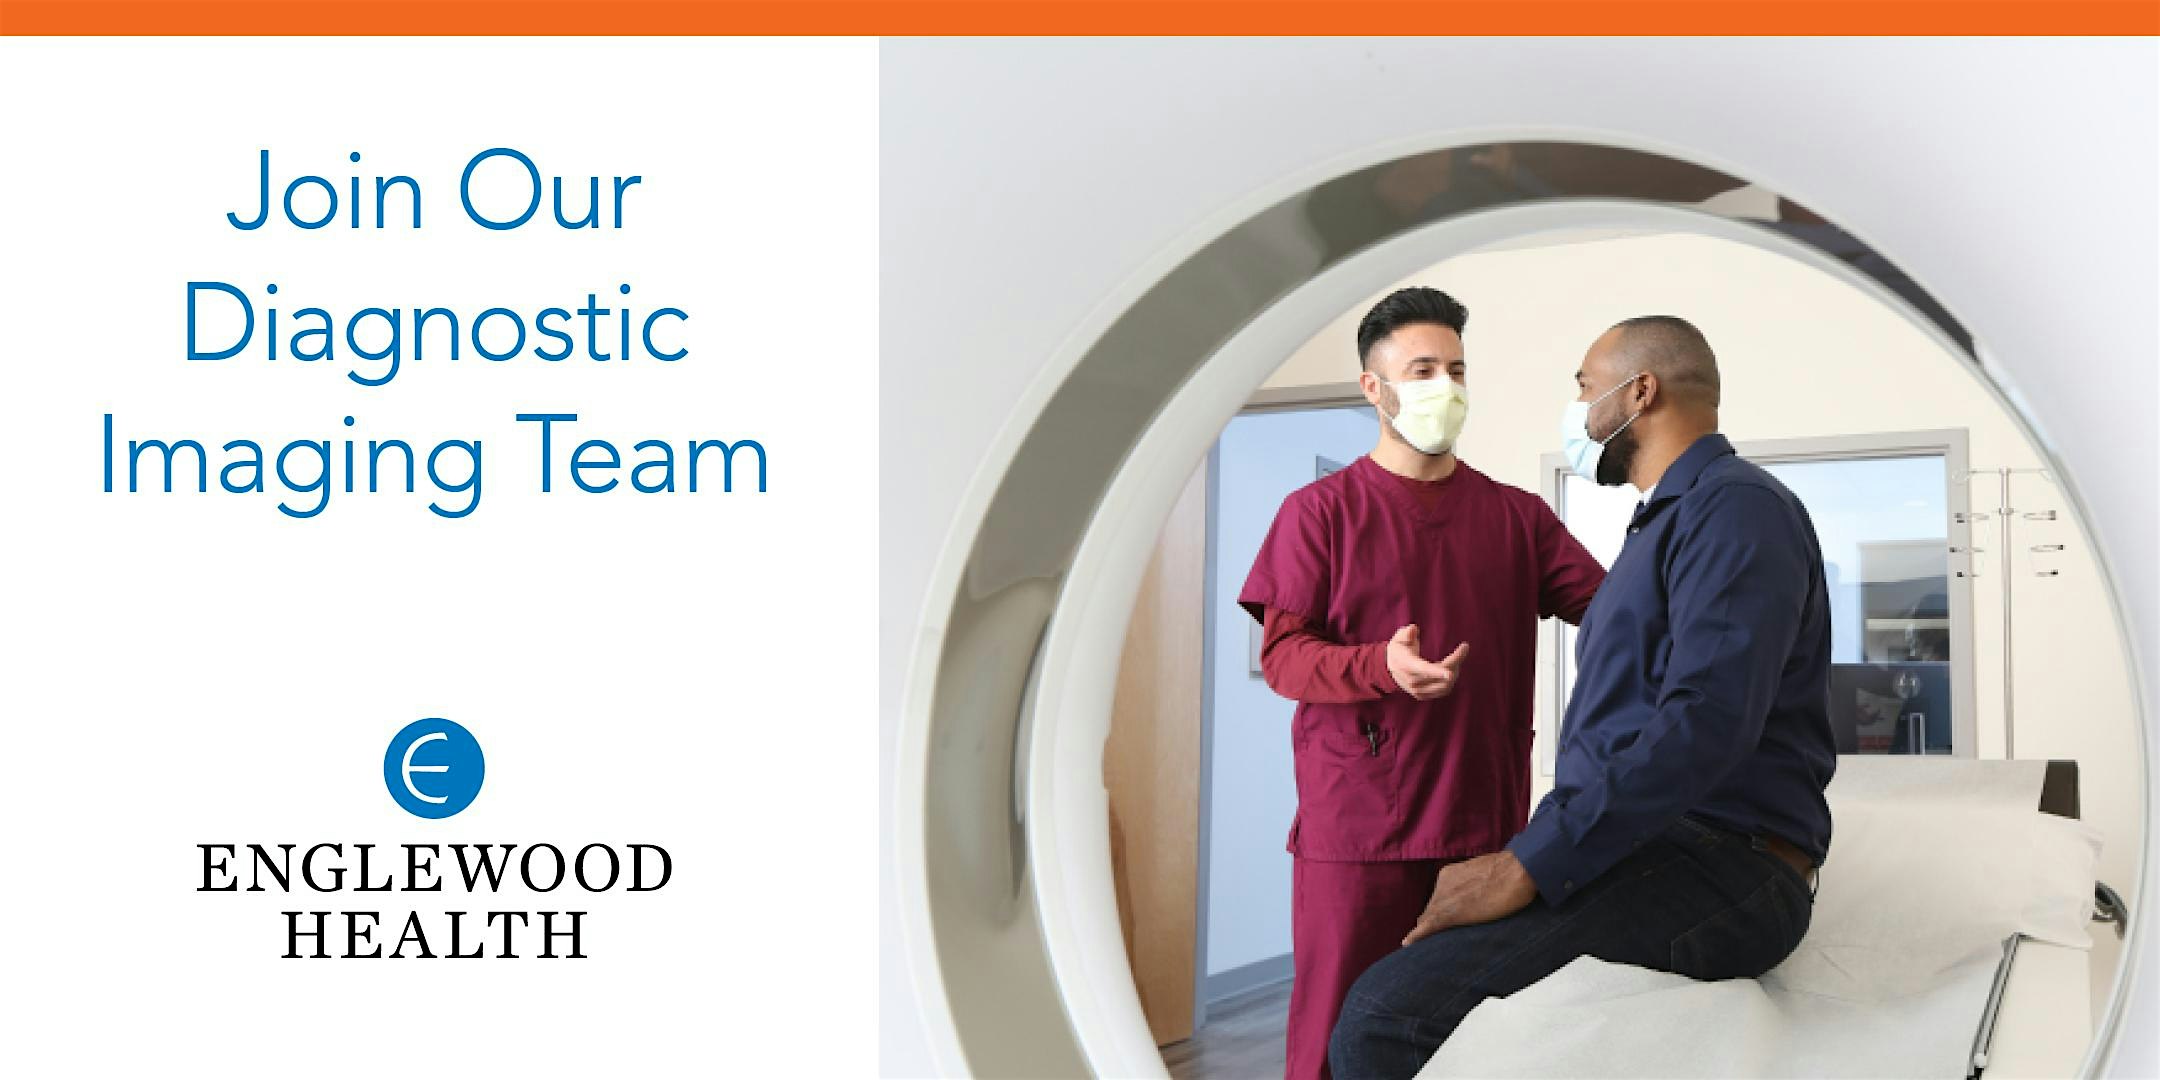 More info: Diagnostic Imaging In-Person Hiring Event